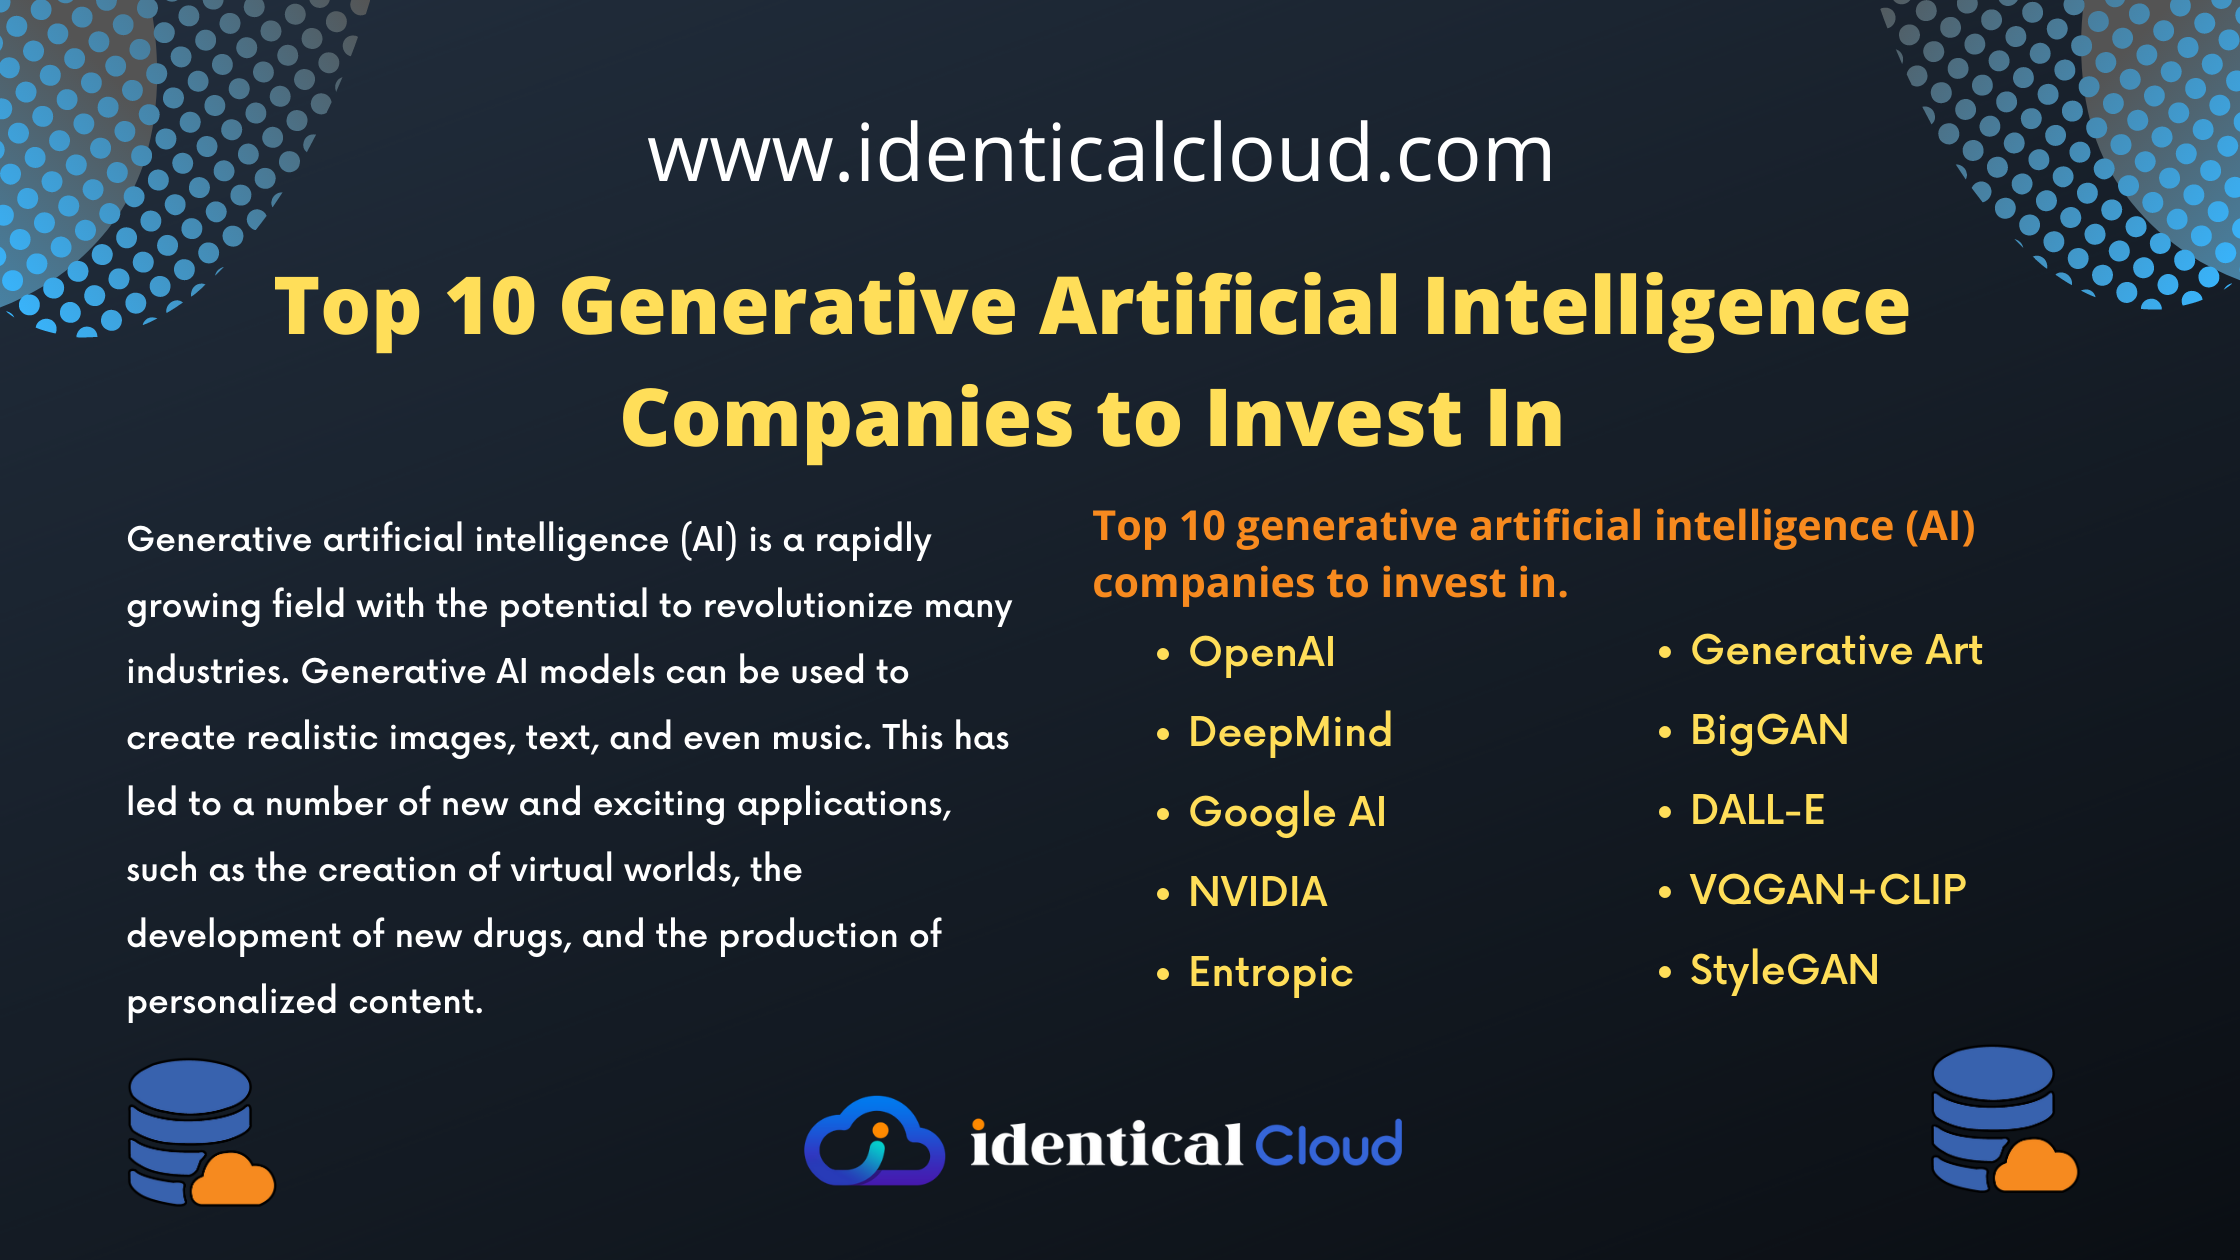 Top 10 Generative Artificial Intelligence Companies To Invest In